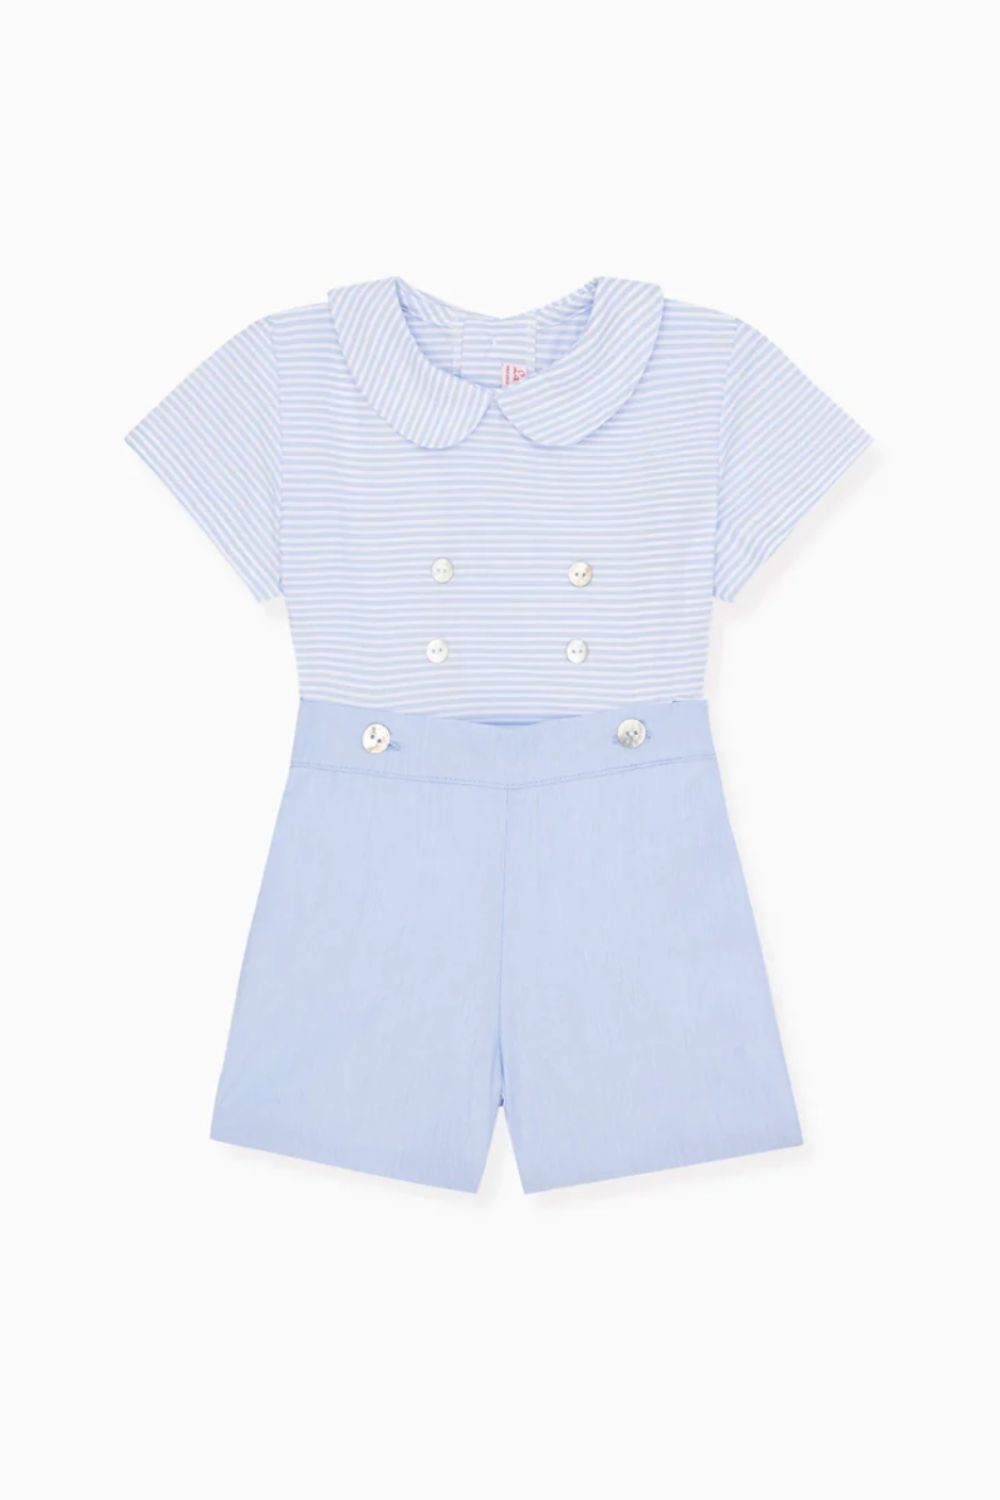 Royal Children Clothes: What Prince George & Princess Charlotte wear ...